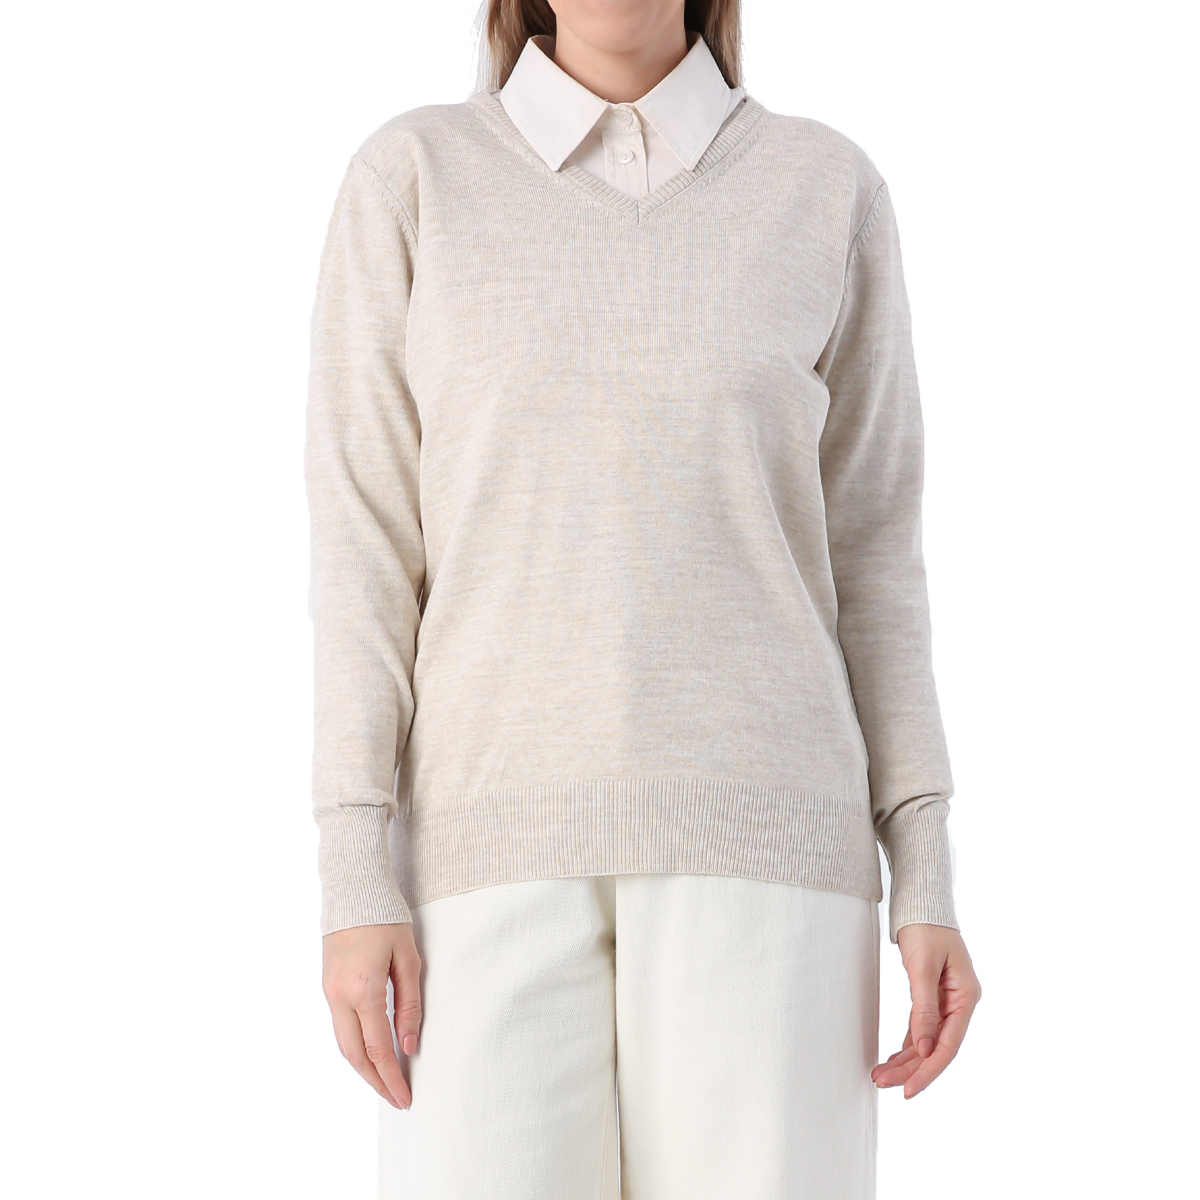 A model wears ALL11346 - V Neck Knitwear Sweater - Stone, wholesale Sweater of Allday to display at Lonca